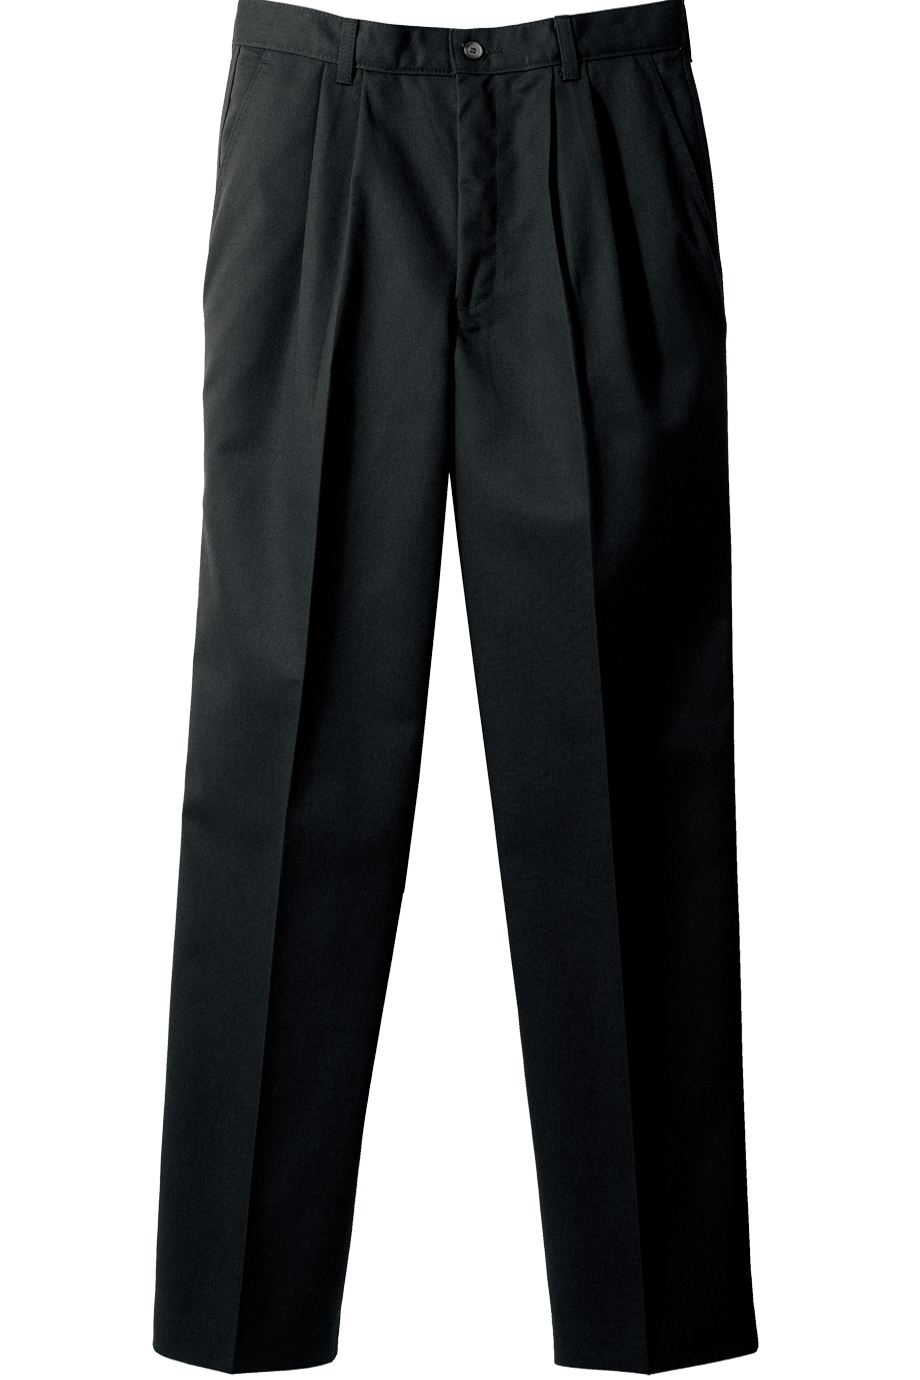 Edwards Big & Tall  Blended Chino Pleated Pant